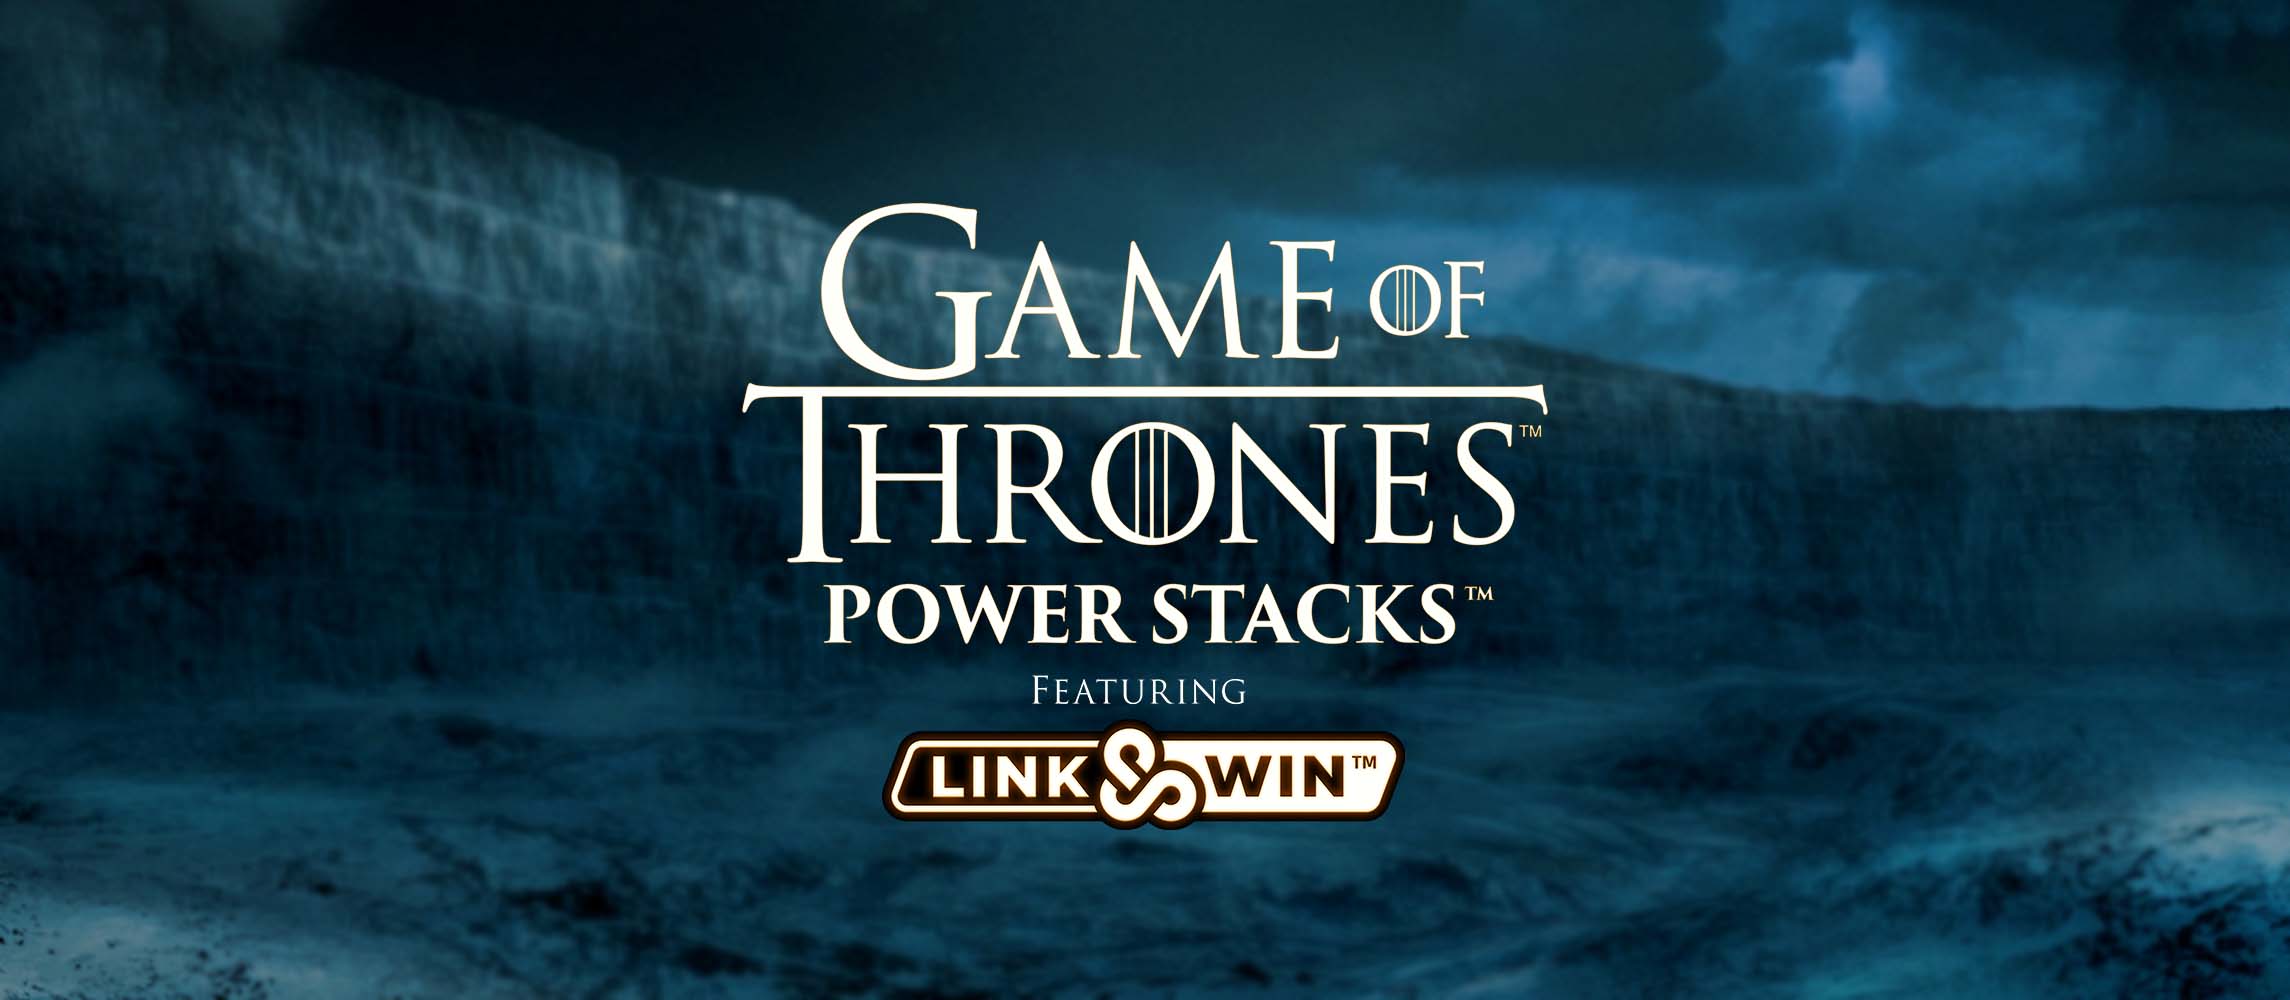 Game of Thrones Power Stacks by Microgaming